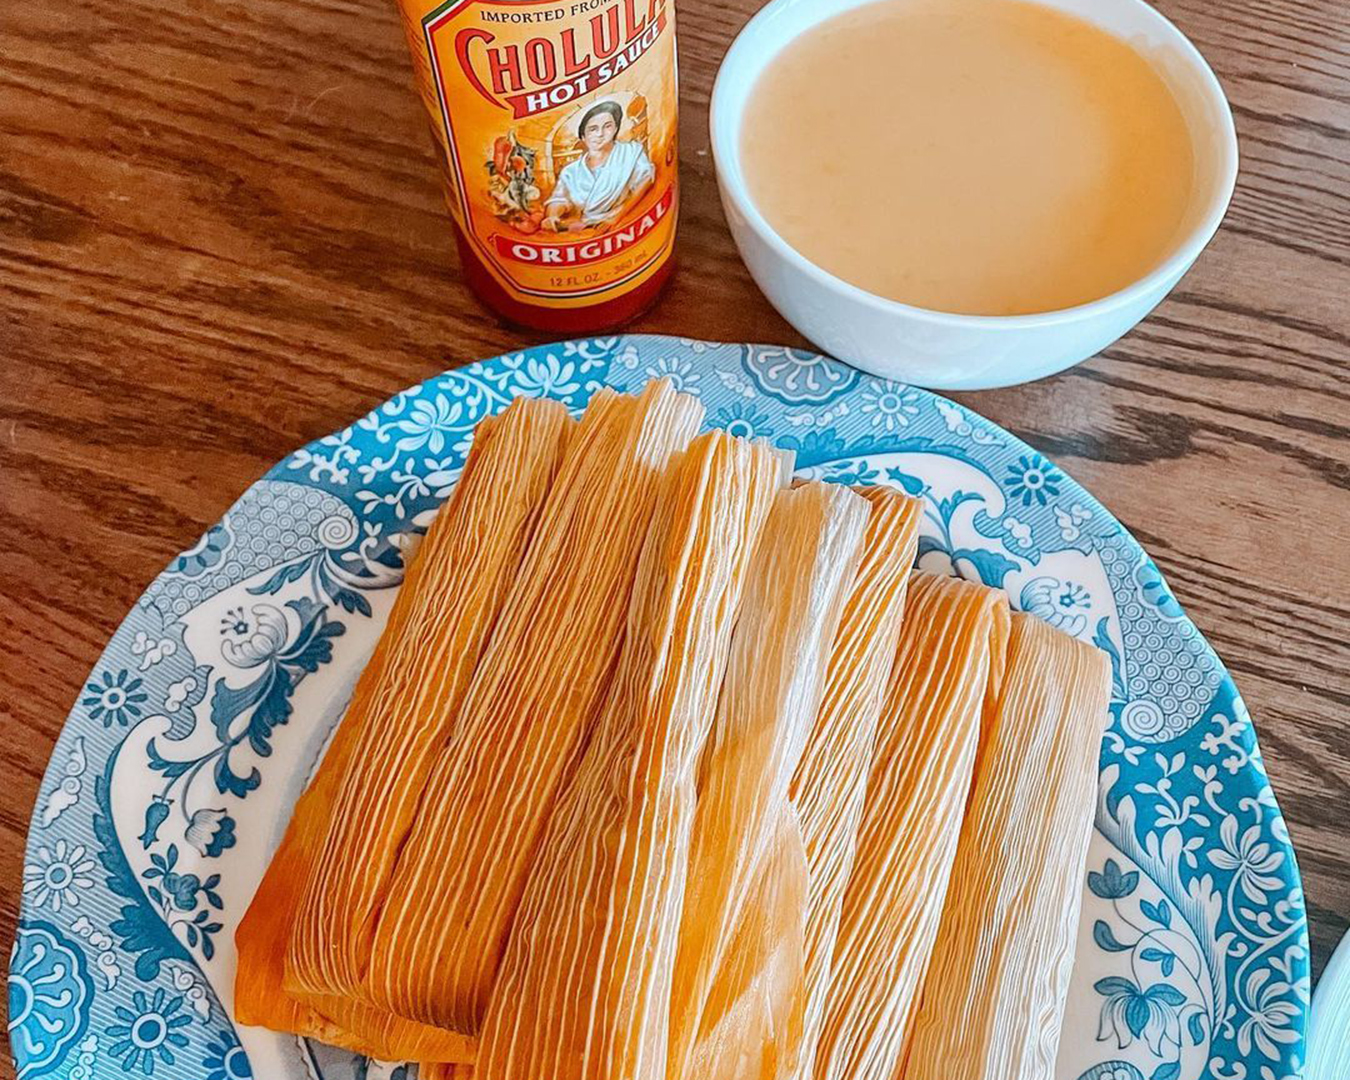 Tamales with Cholula Hot Sauce in the background